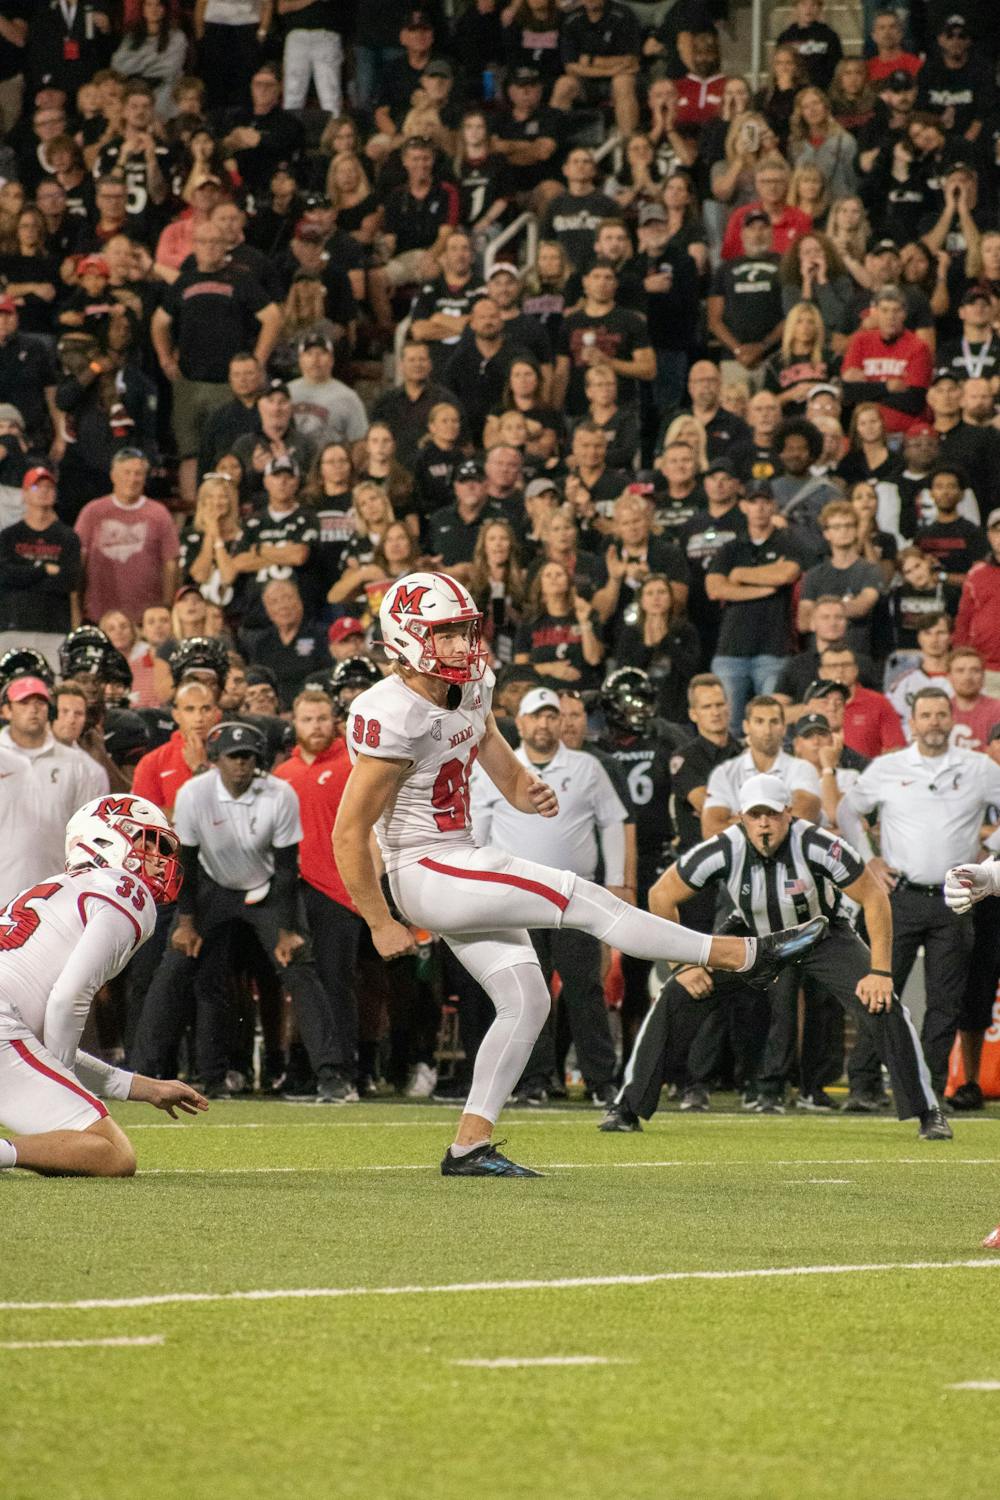 <p>Graham Nicholson is one of ﻿three qualified FBS kickers who hasn&#x27;t missed a field goal this season. He has made 17 field goals, the other two have made 11 and nine respectively.</p>